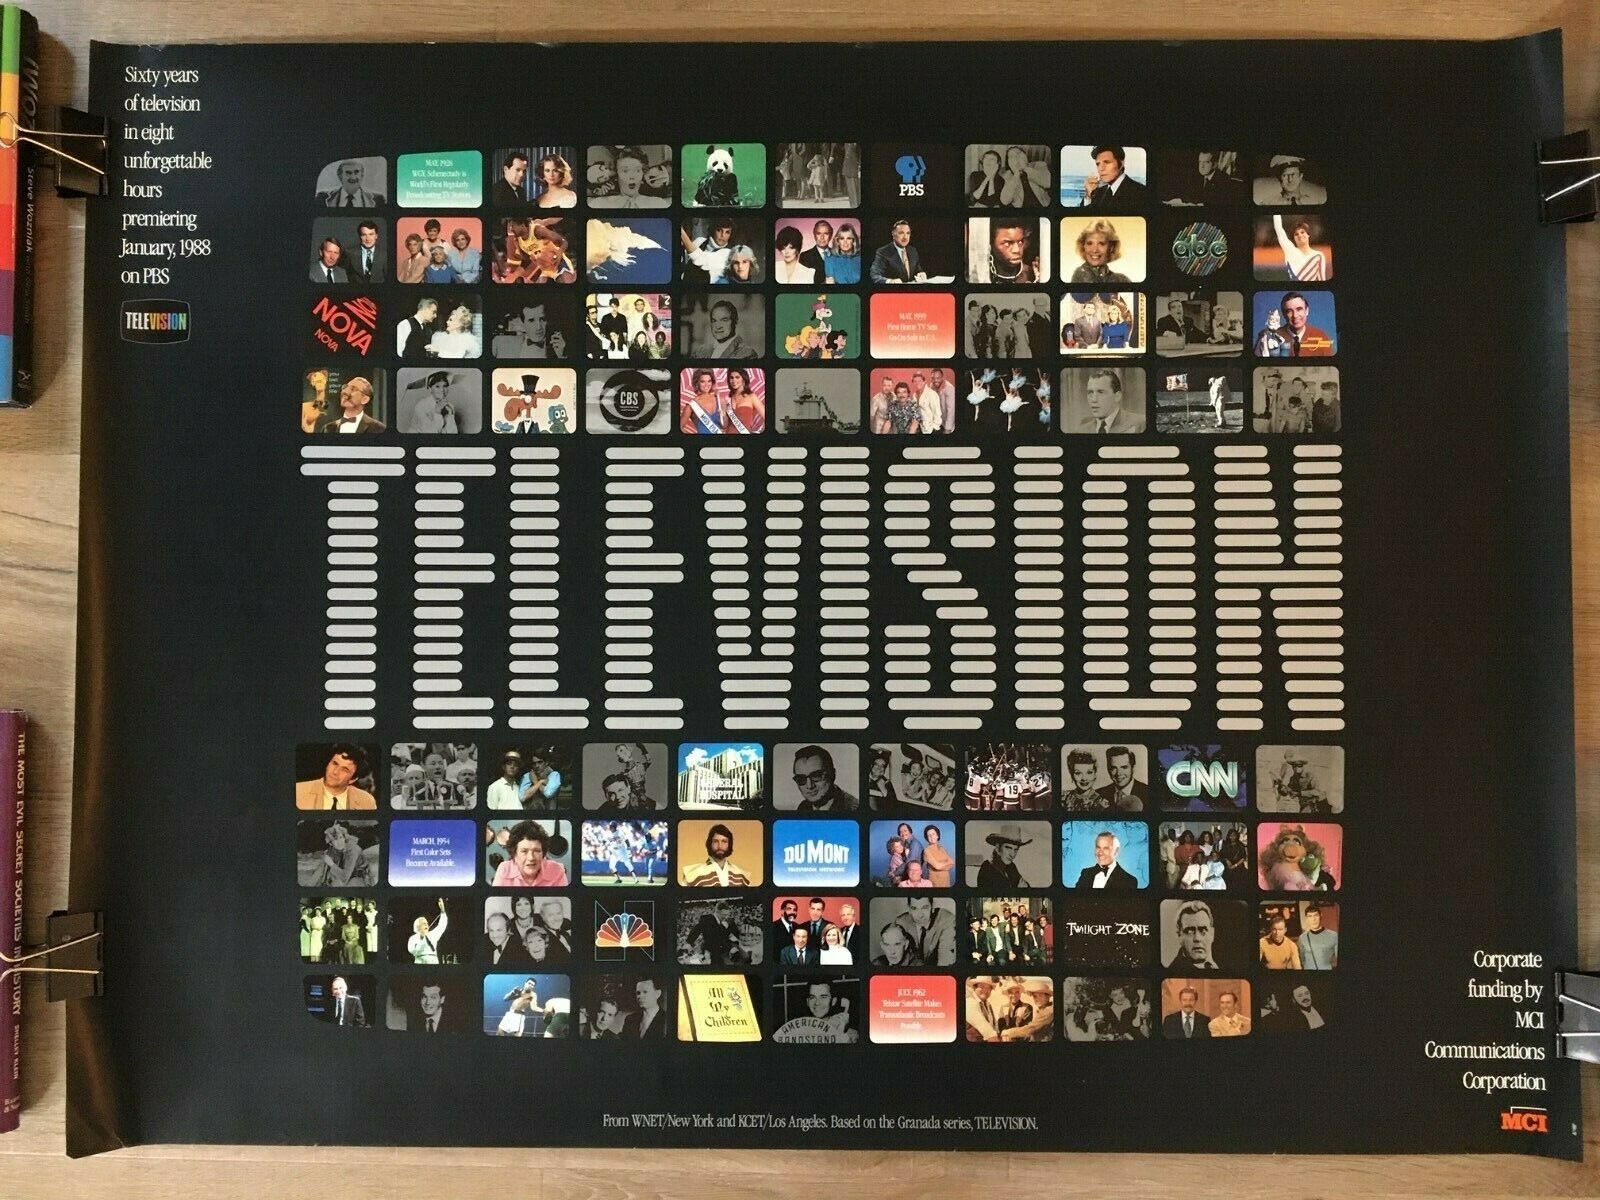 Rare Vintage 1988 "television" The Series Pbs Original Poster - Rolled 27" X 36"